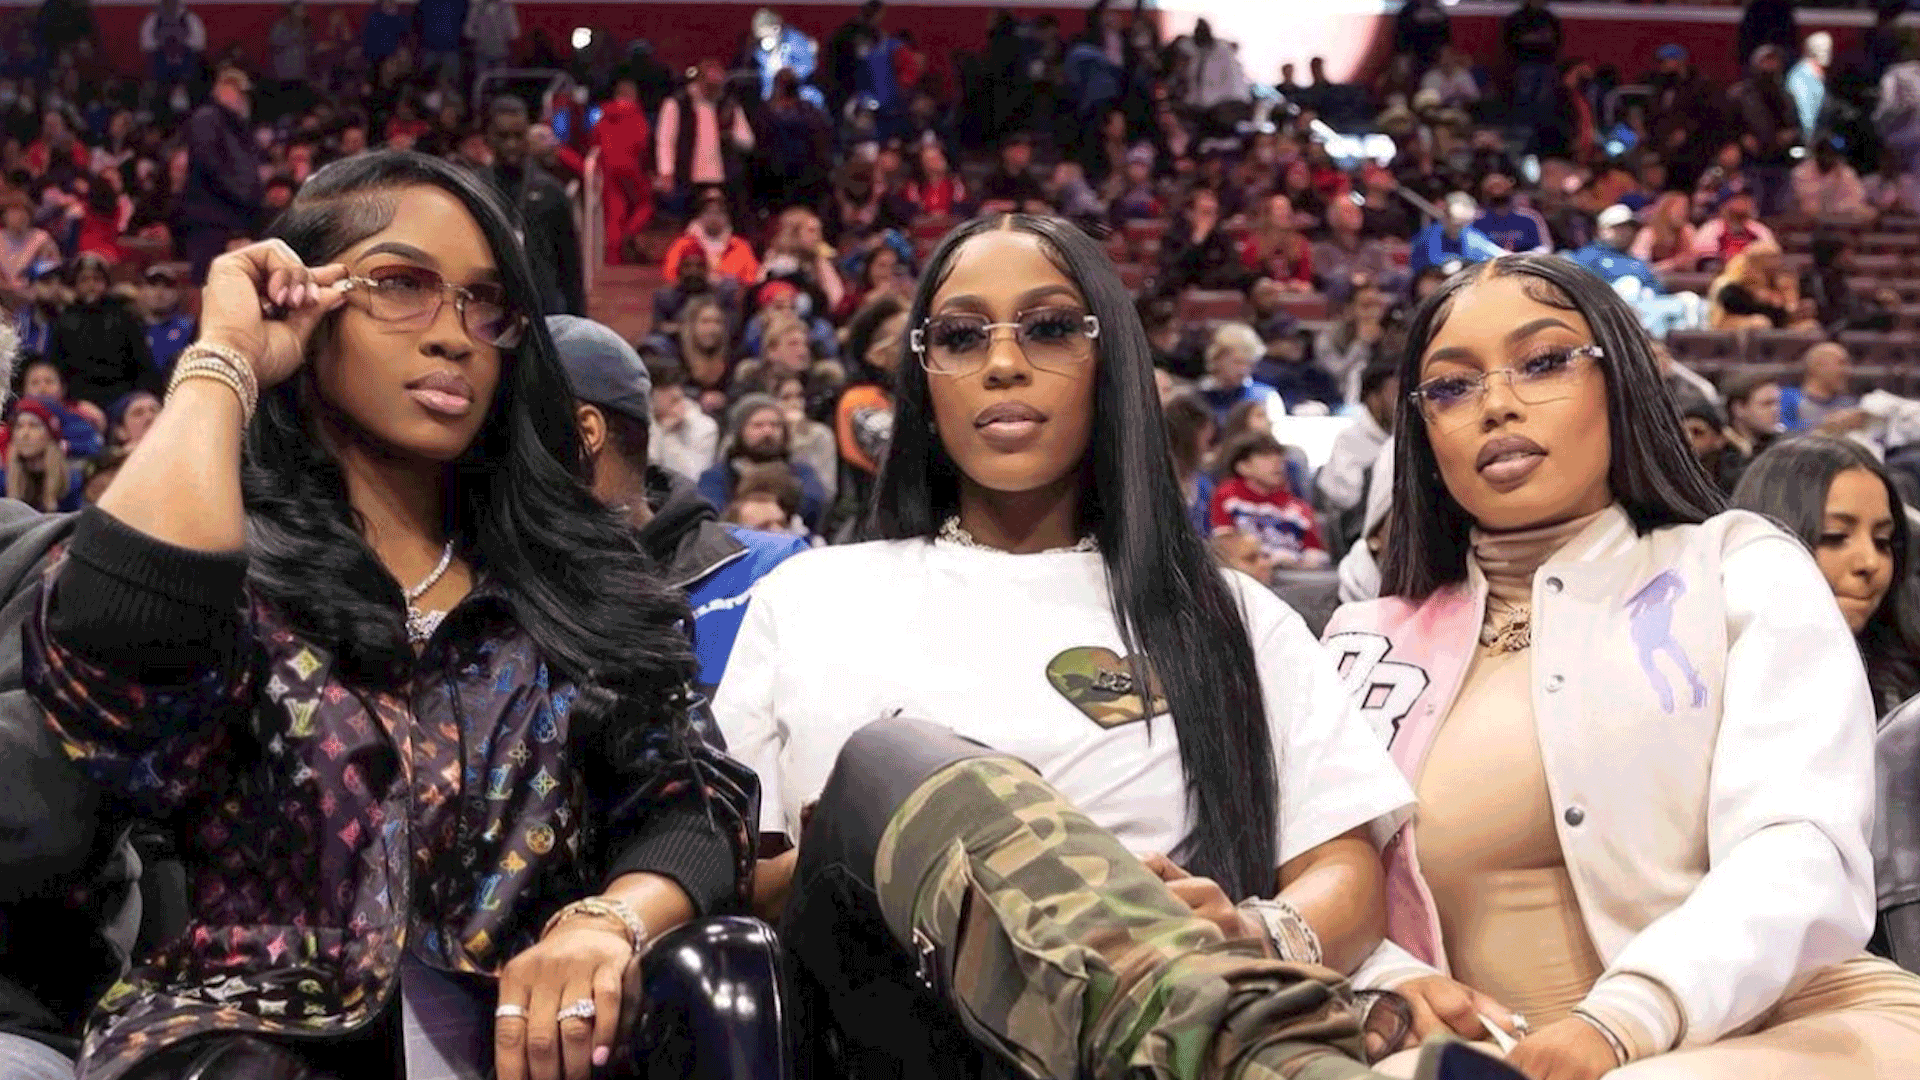 Kash Doll Speaks Out About Scammers Posing As Her Team To Steal THOUSANDS Of Dollars TSR Investigates